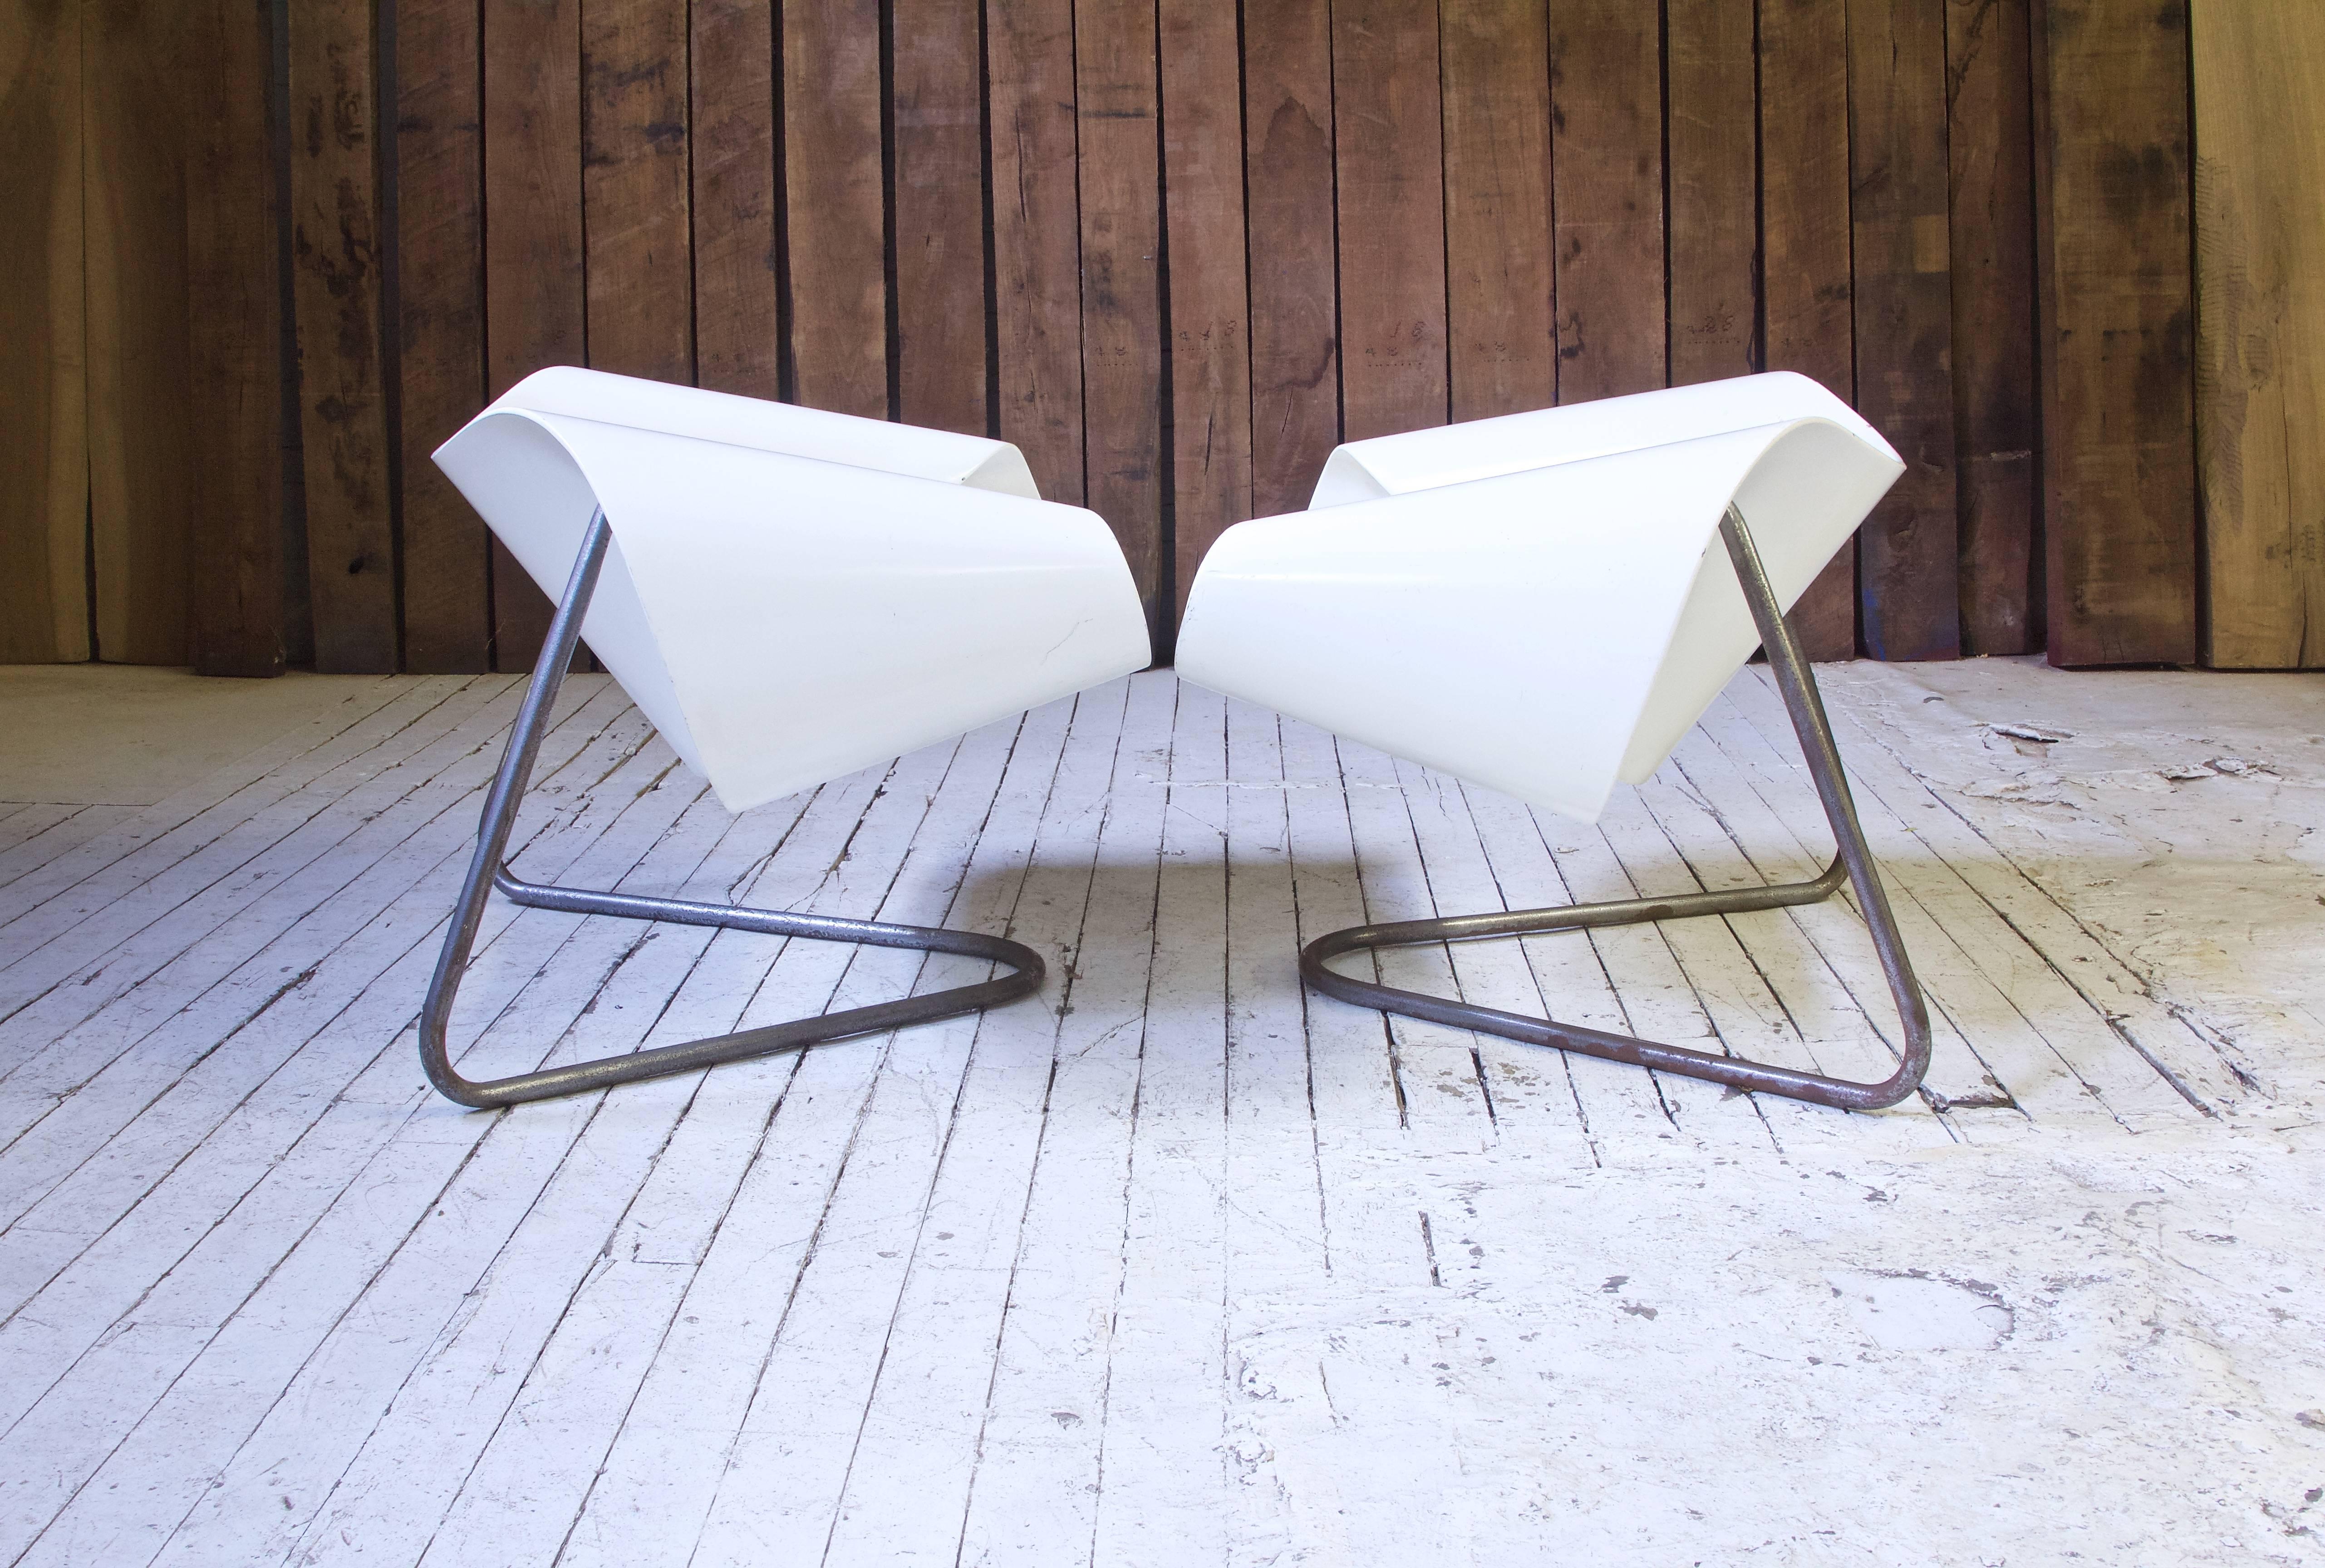 Sculptural pair of rare CL-9 fiberglass and polished steel lounge chairs by Franca Stagi and Cesare Leonardi for Bernini, 1961. Incredible lines, extremely comfortable; awesome examples of Italian experimental design of the mid-20th century.